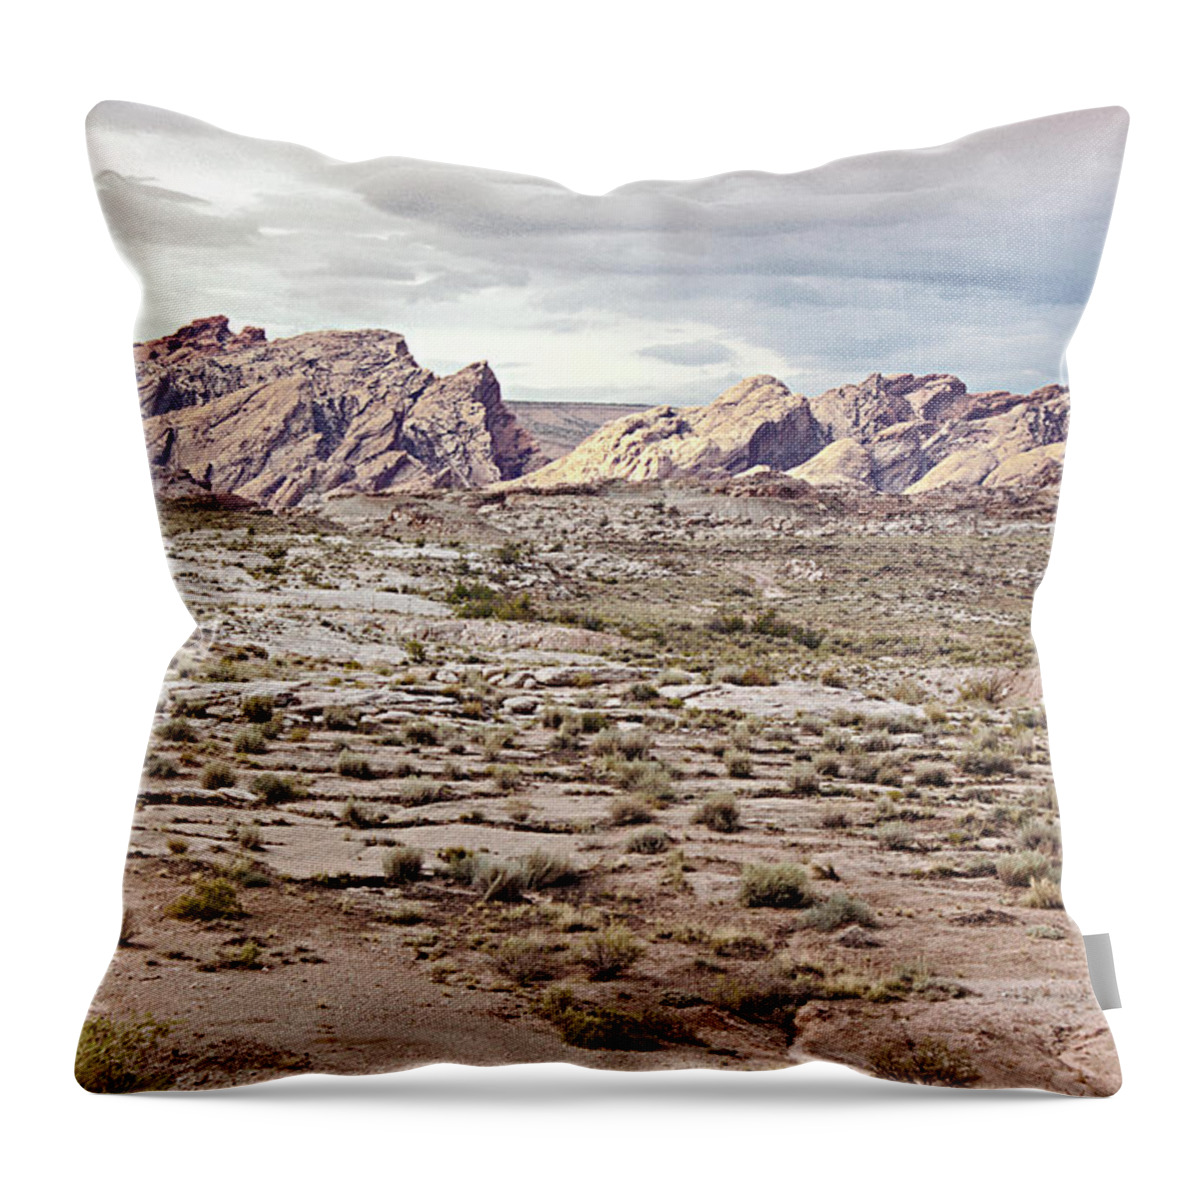 Rock Throw Pillow featuring the photograph Weird Rock Formation by Peter J Sucy